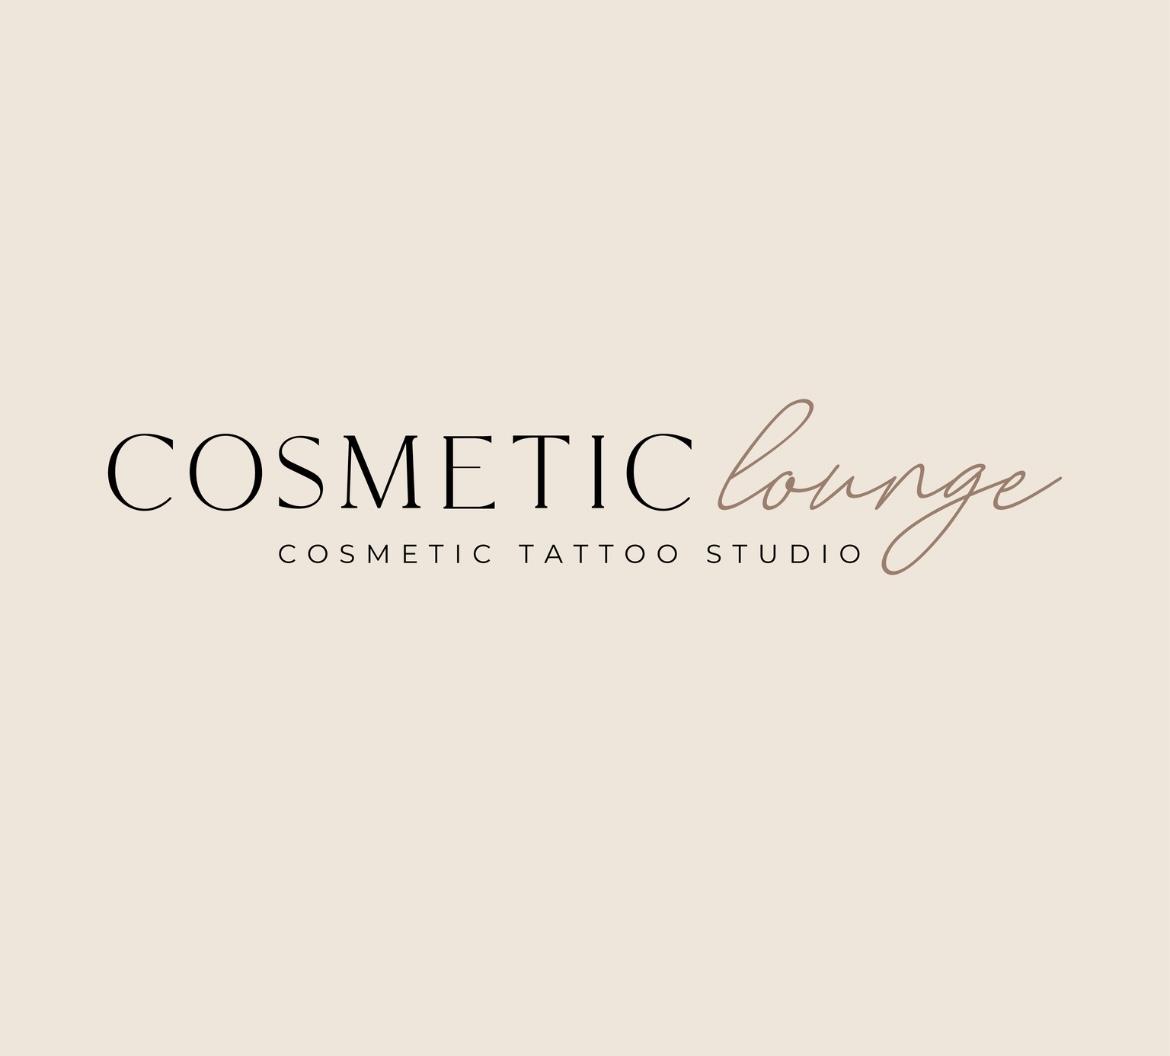 The Cosmetic Lounge